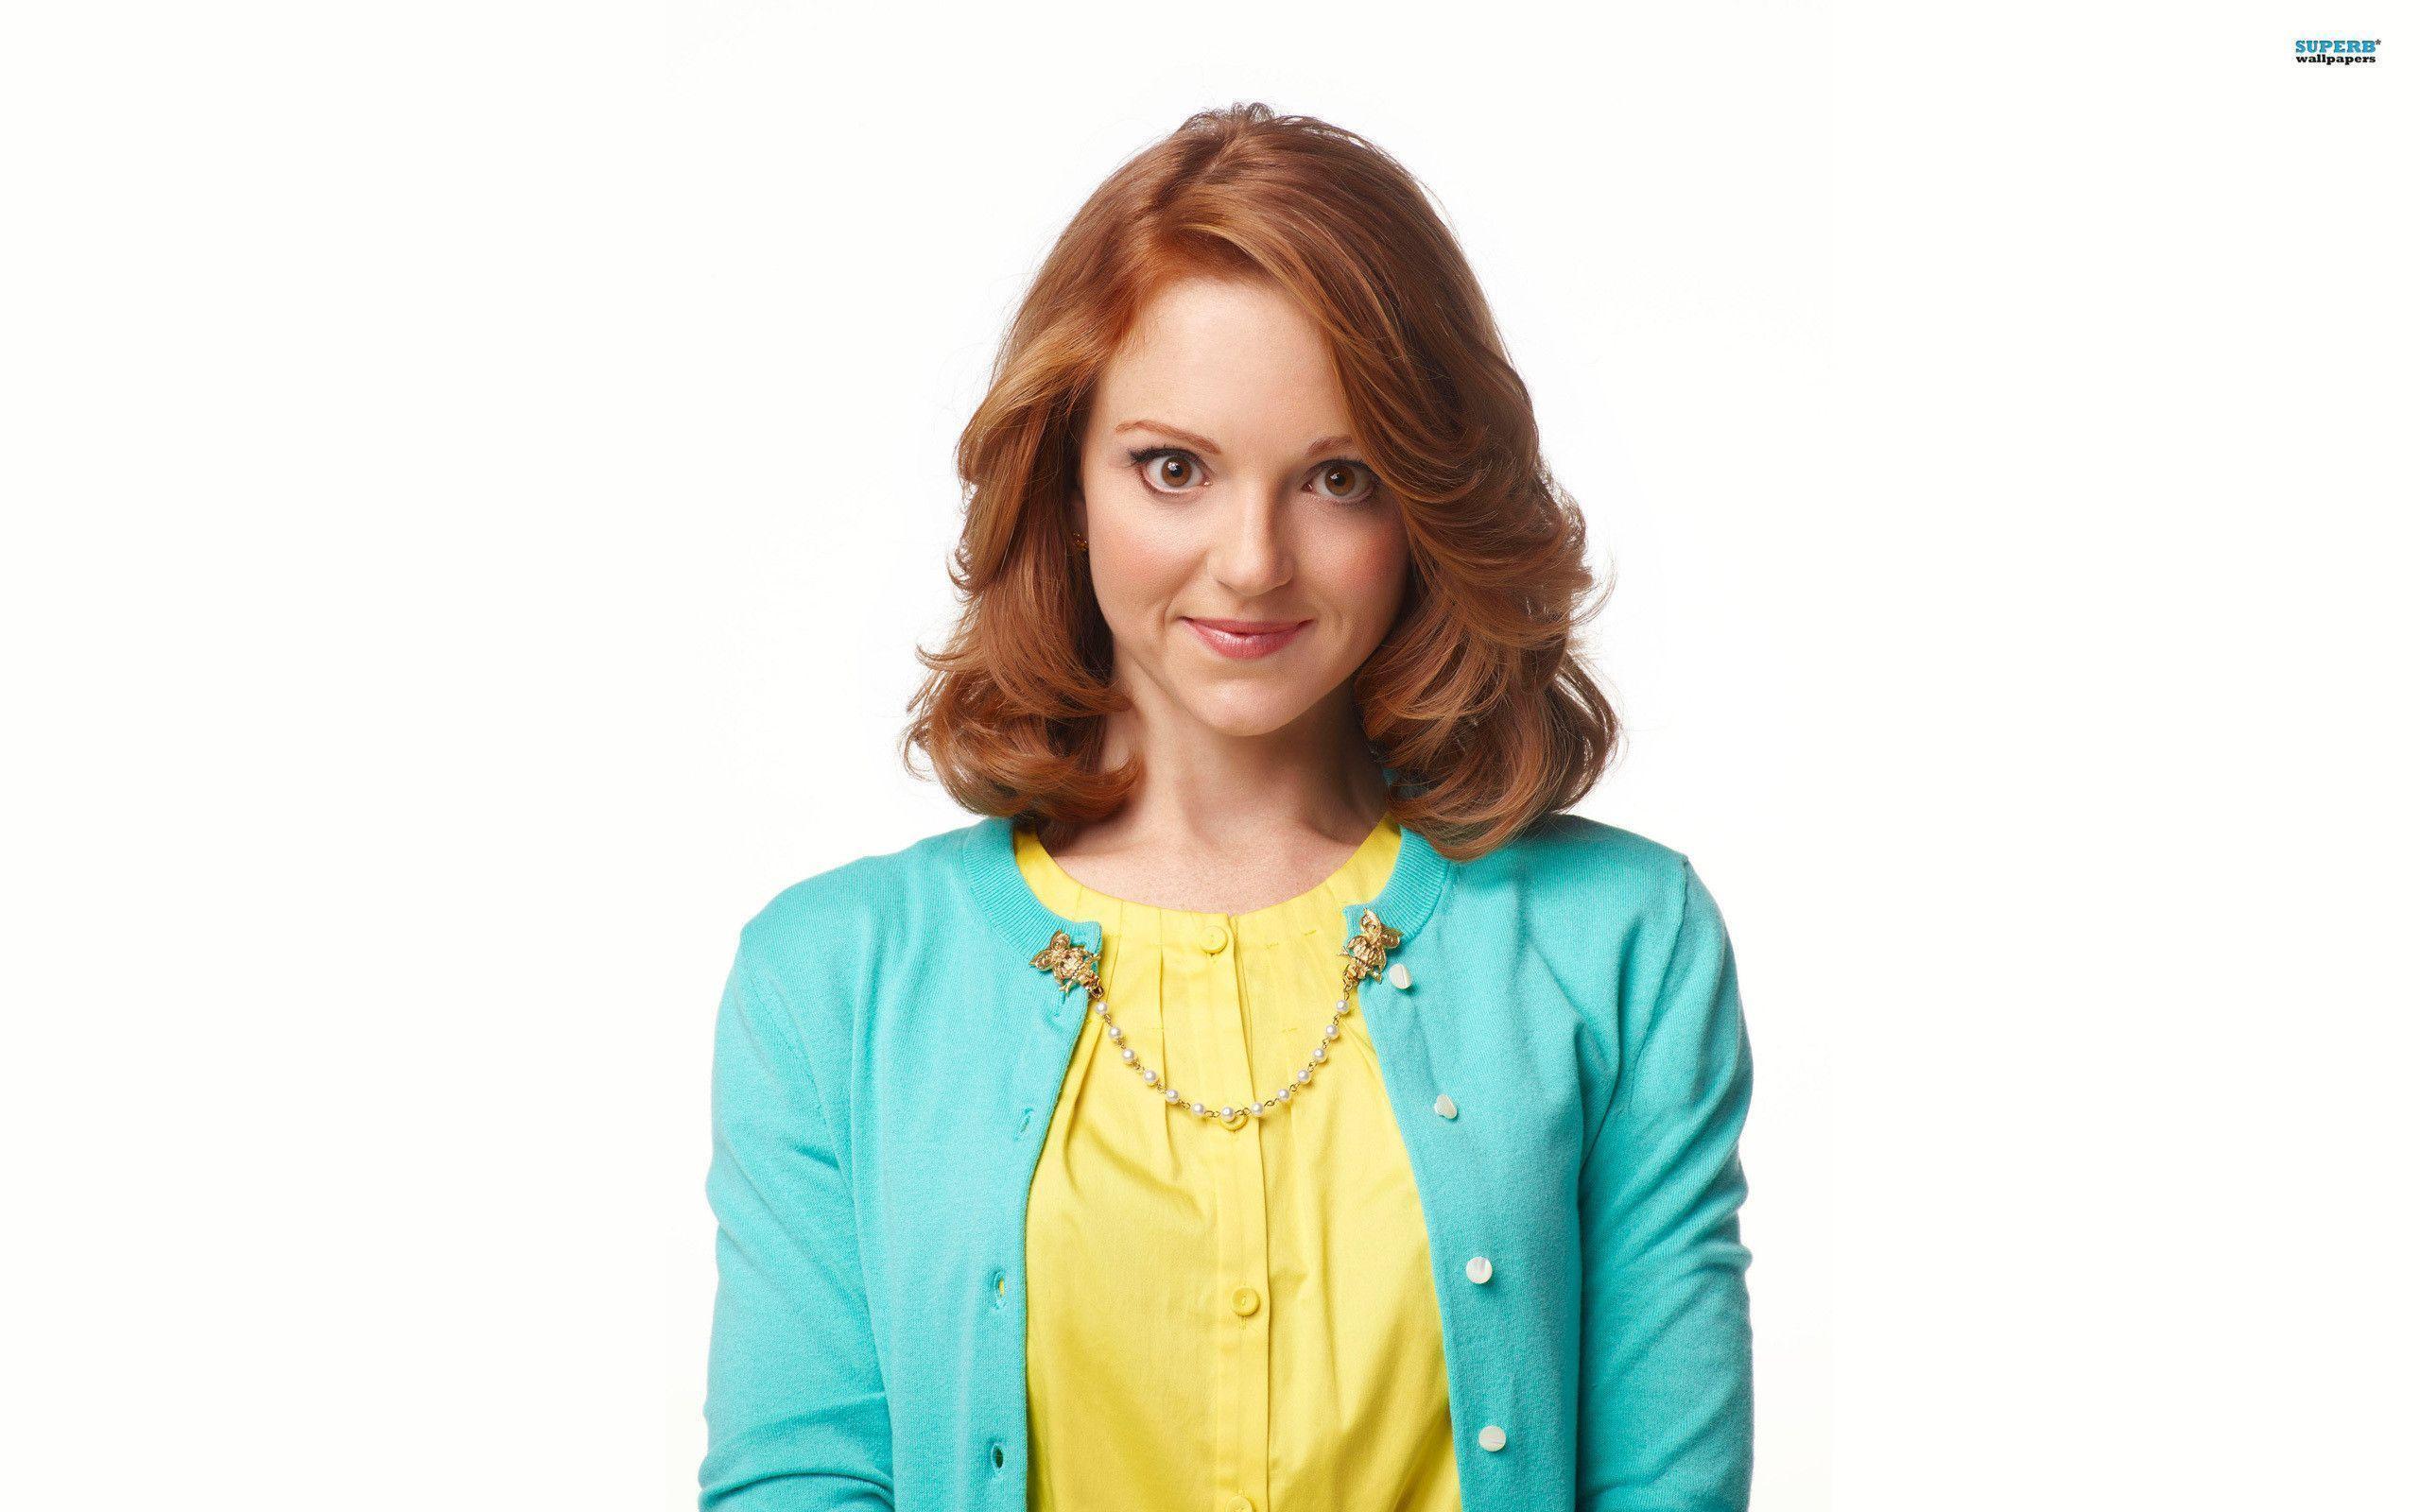 Jayma Mays Wallpaper. Daily inspiration art photo, picture